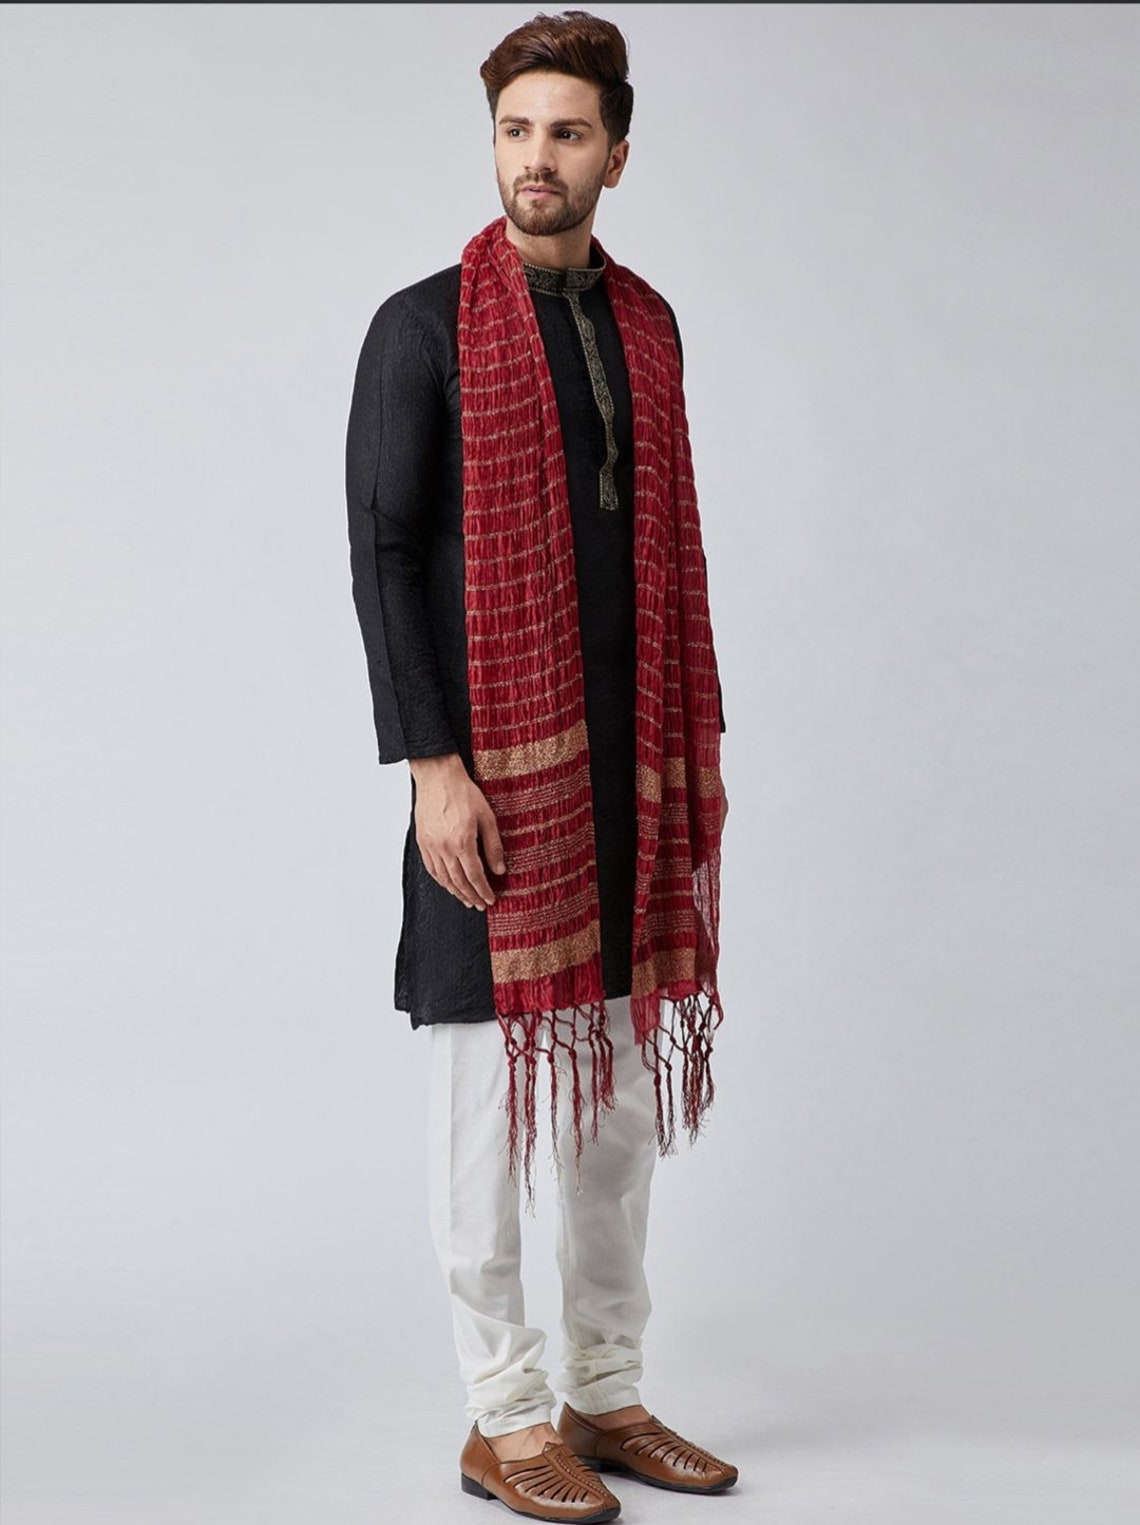 Dupatta Stole for Men- Maroon Indian Clothing in Denver, CO, Aurora, CO, Boulder, CO, Fort Collins, CO, Colorado Springs, CO, Parker, CO, Highlands Ranch, CO, Cherry Creek, CO, Centennial, CO, and Longmont, CO. NATIONWIDE SHIPPING USA- India Fashion X